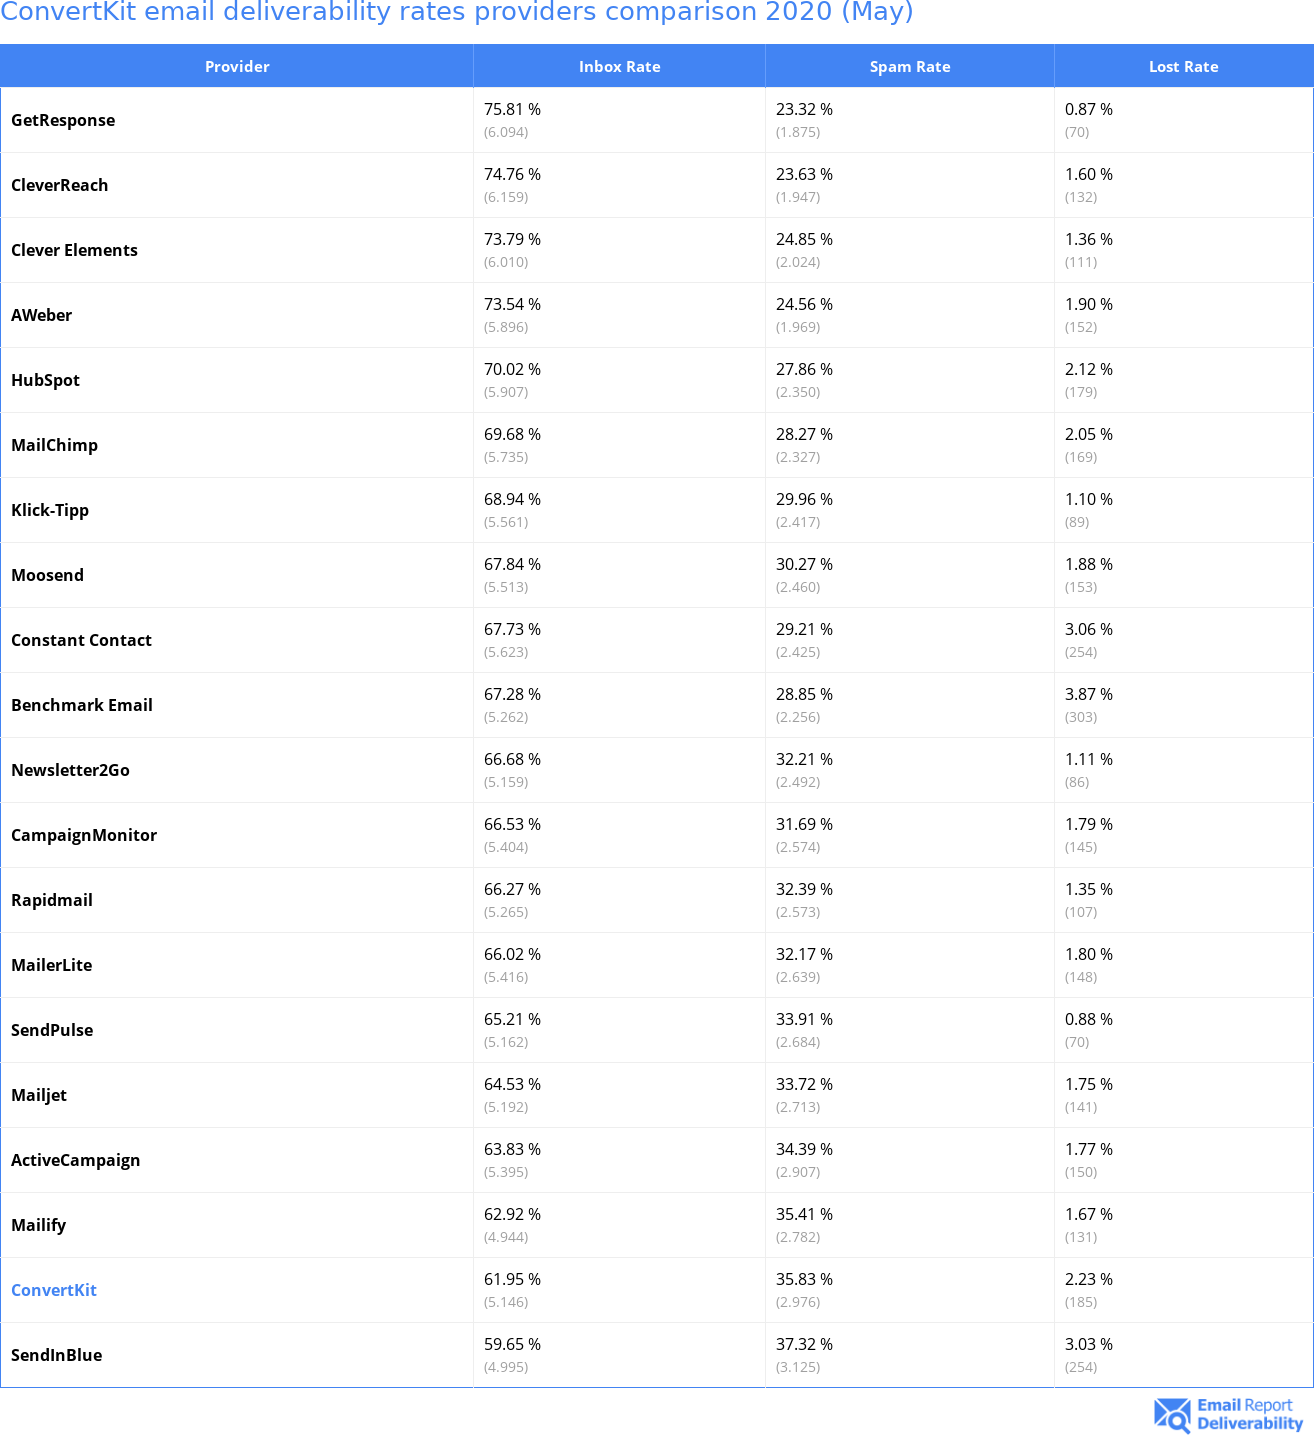 ConvertKit email deliverability rates providers comparison 2020 (May)